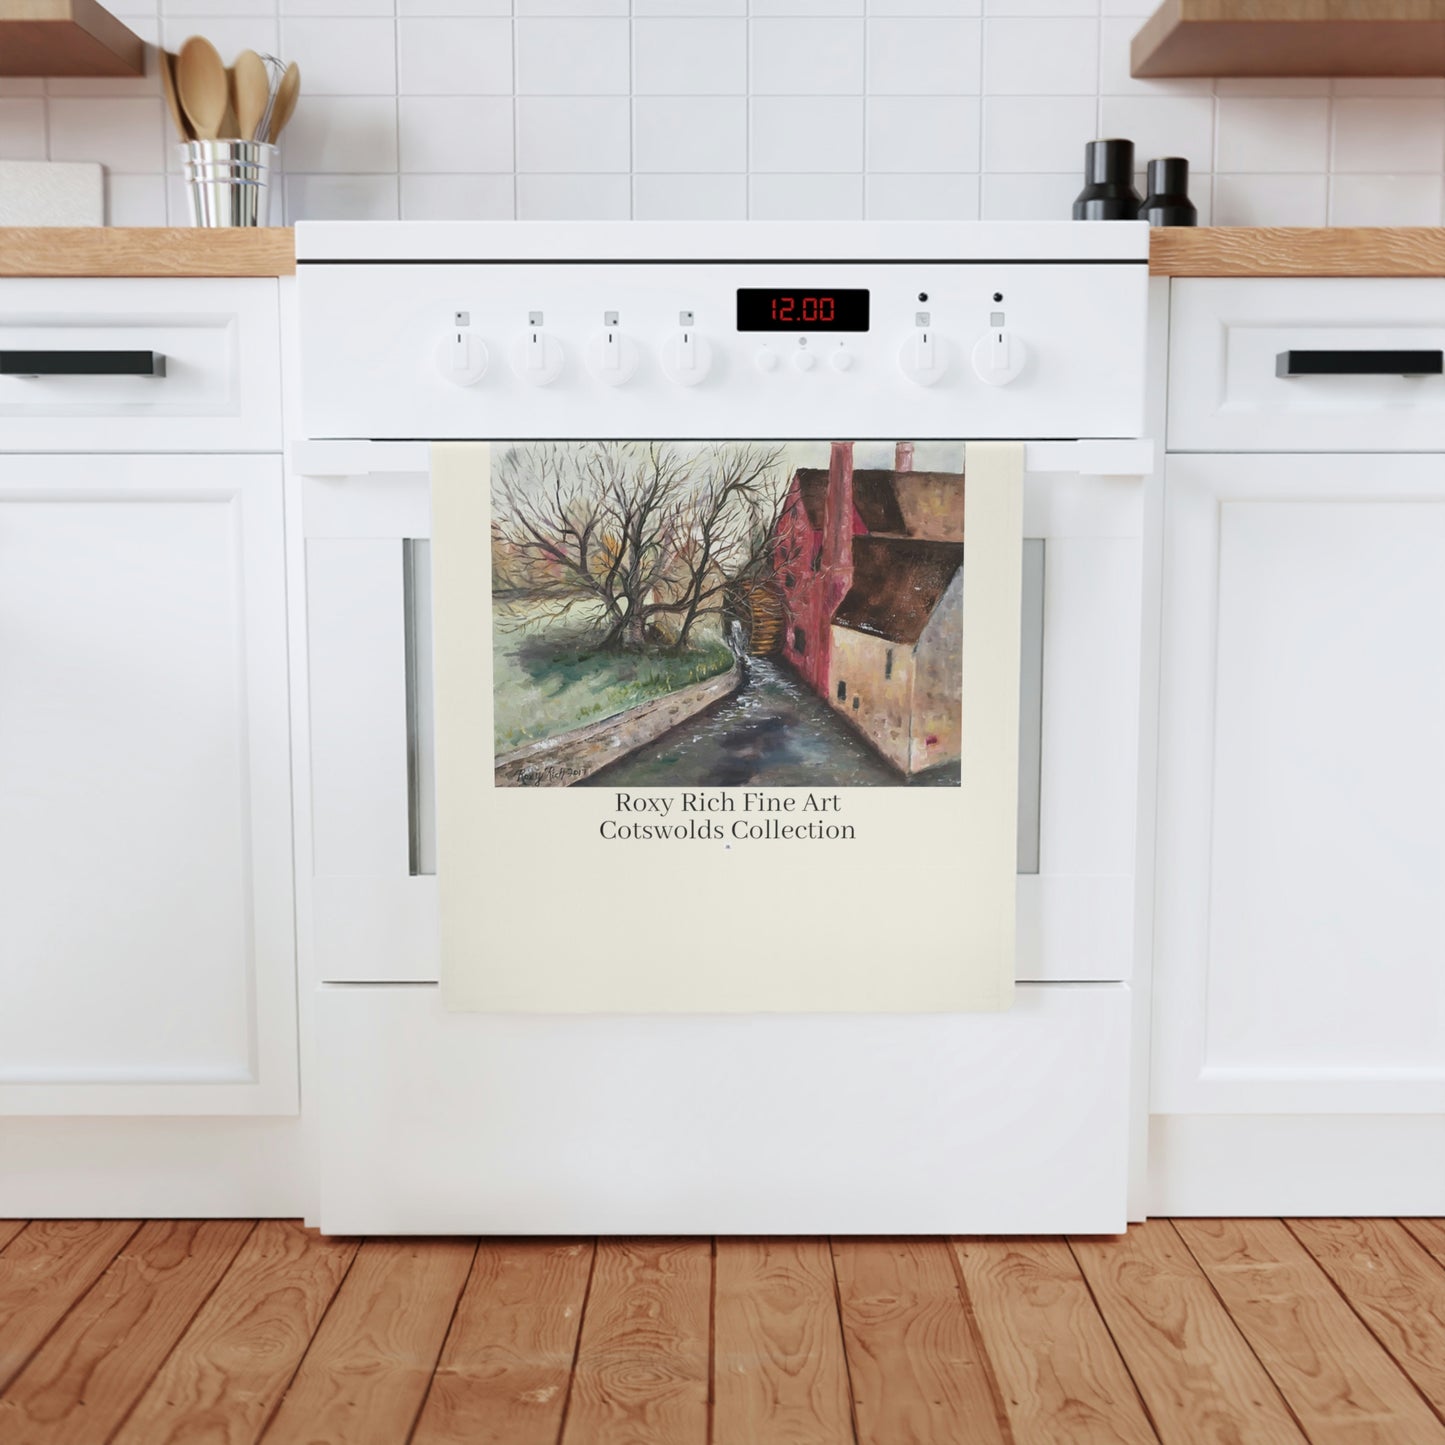 The Old Mill (Lower Slaughter) Cotswolds Organic Vegan Cotton Tea Towel